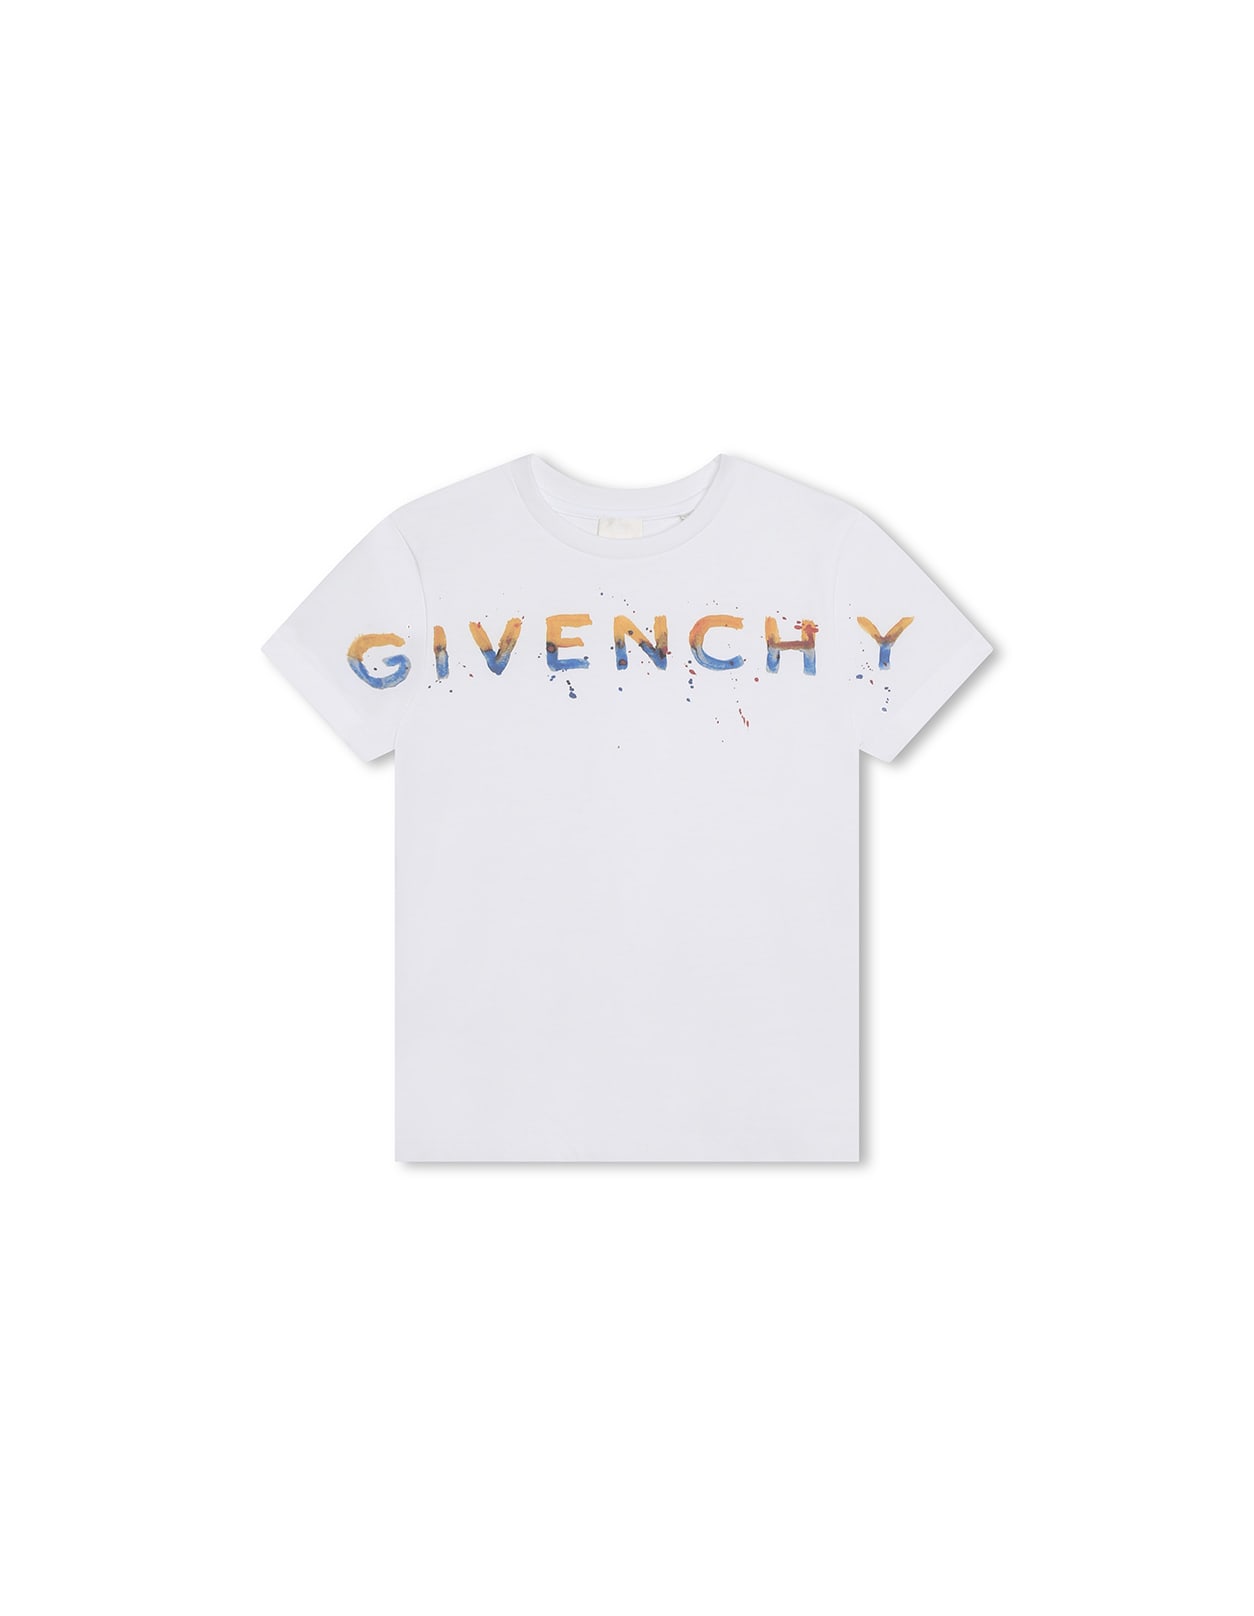 GIVENCHY WHITE T-SHIRT WITH LOGO PAINTED EFFECT